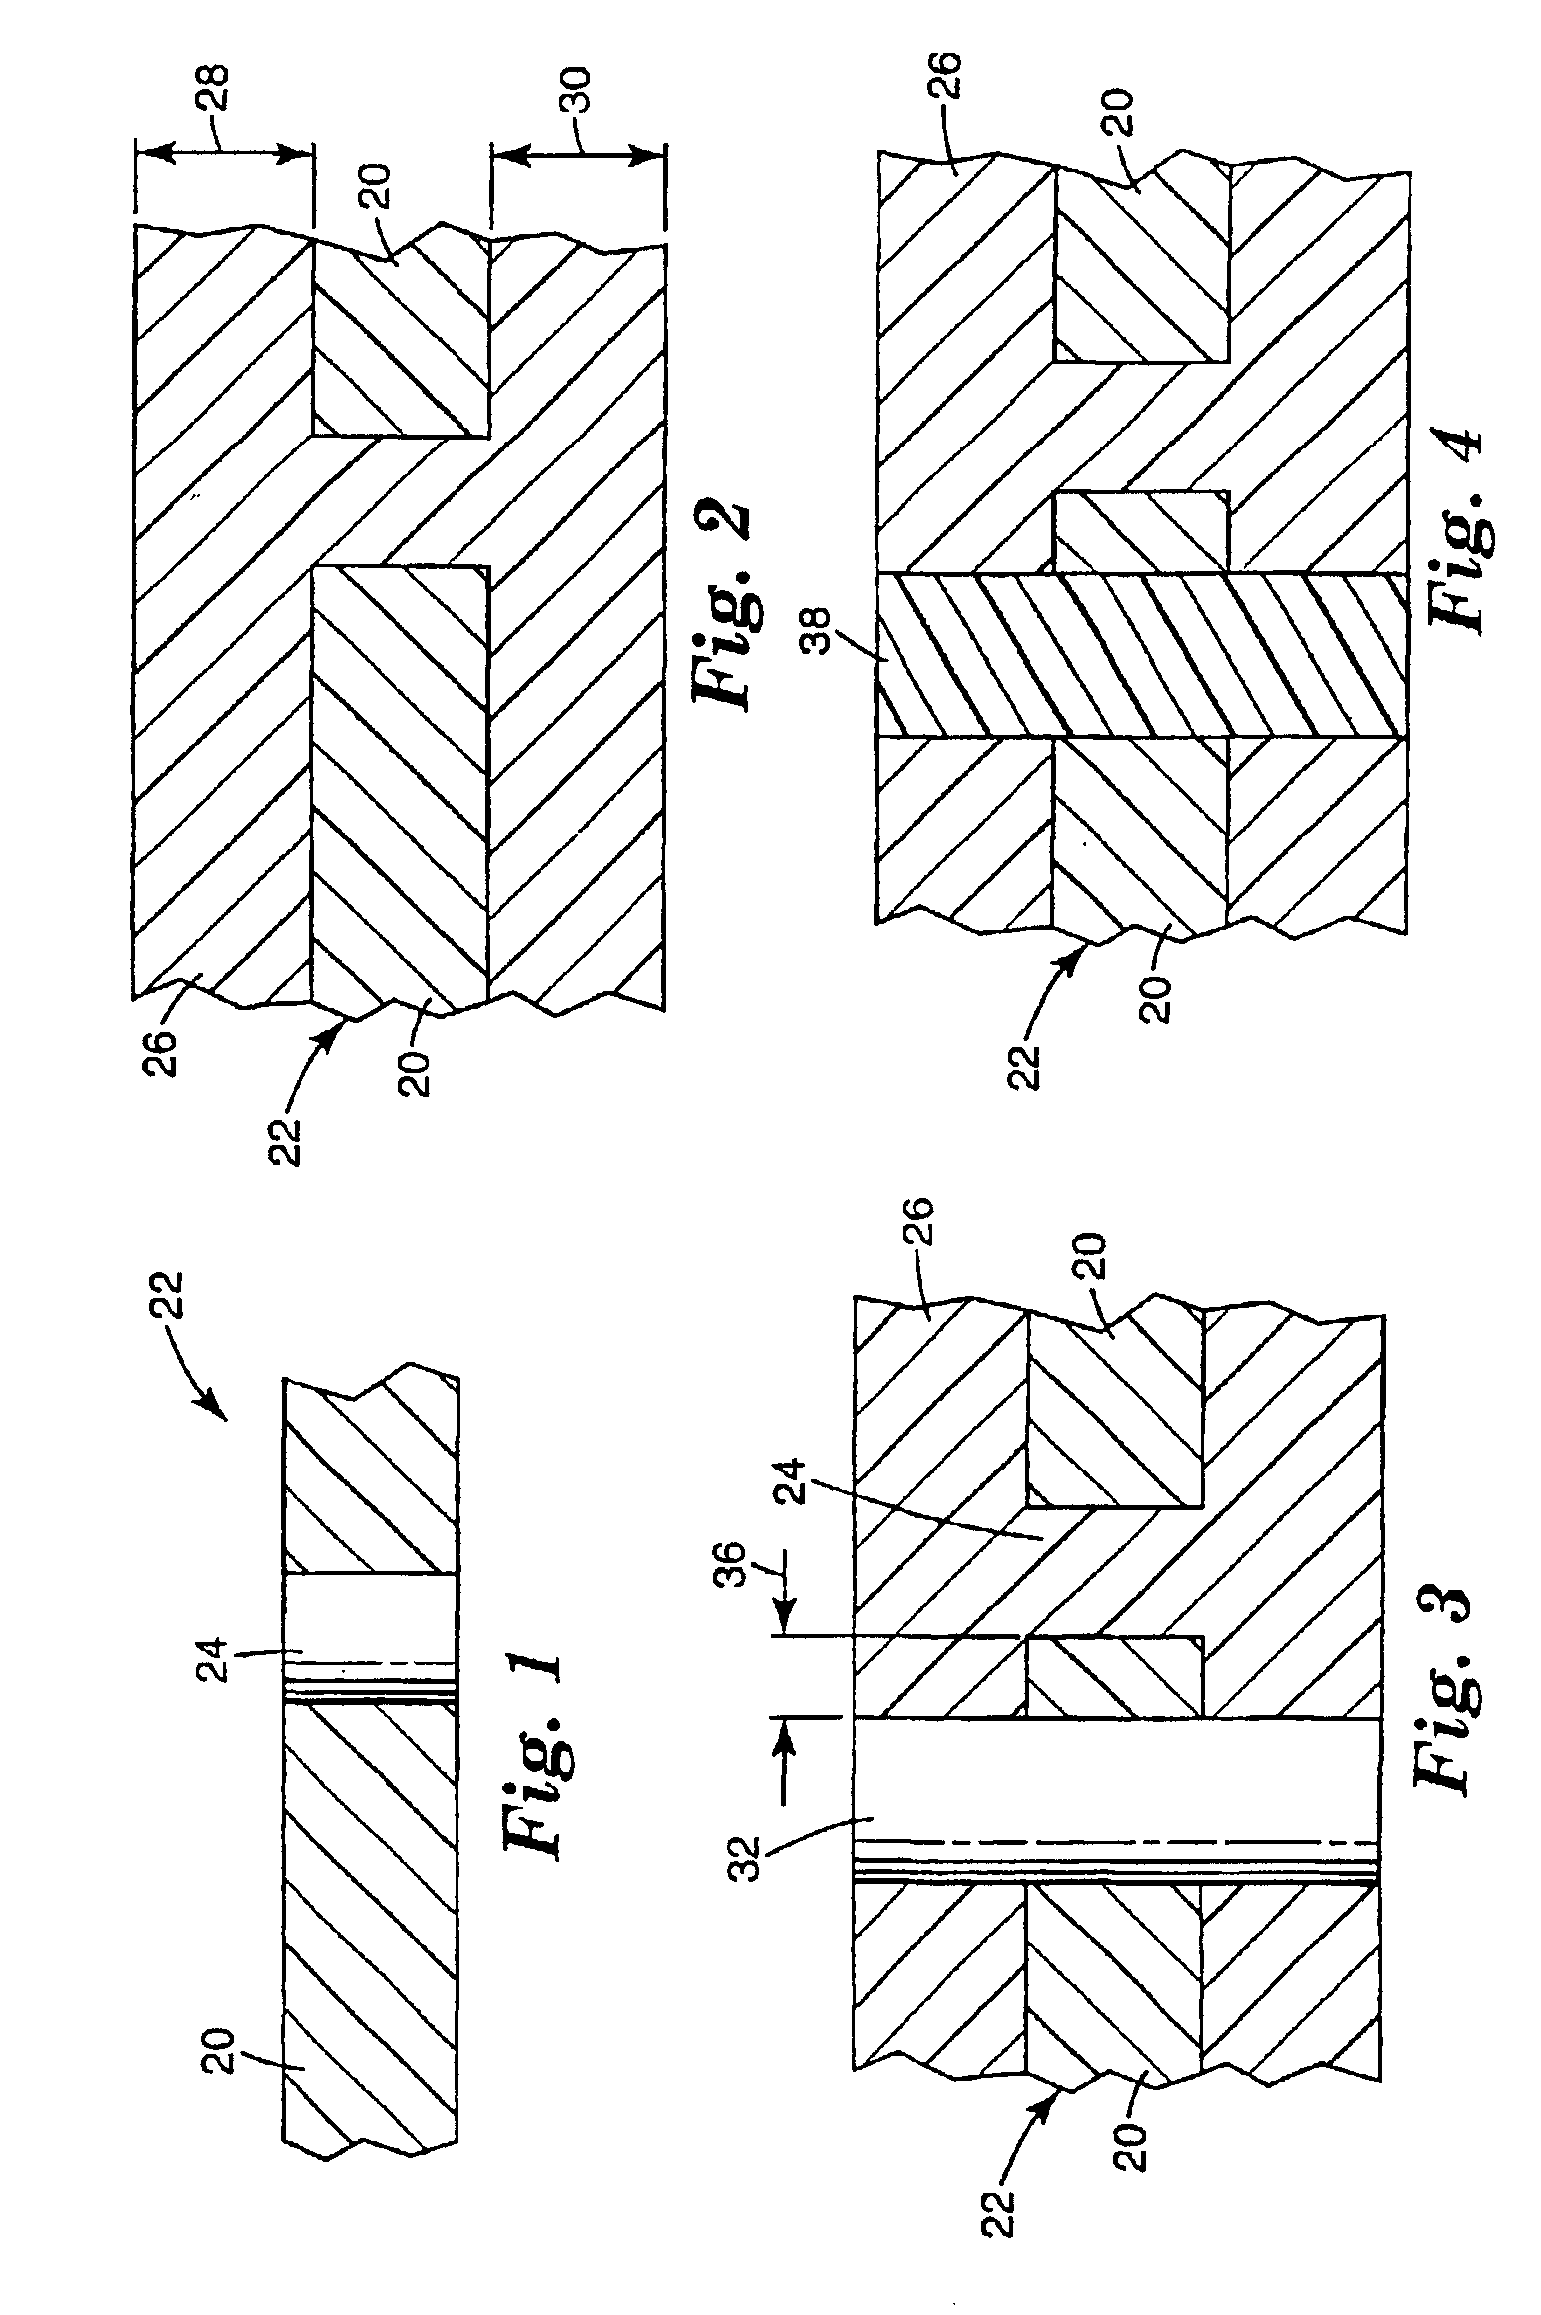 Flexible compliant interconnect assembly